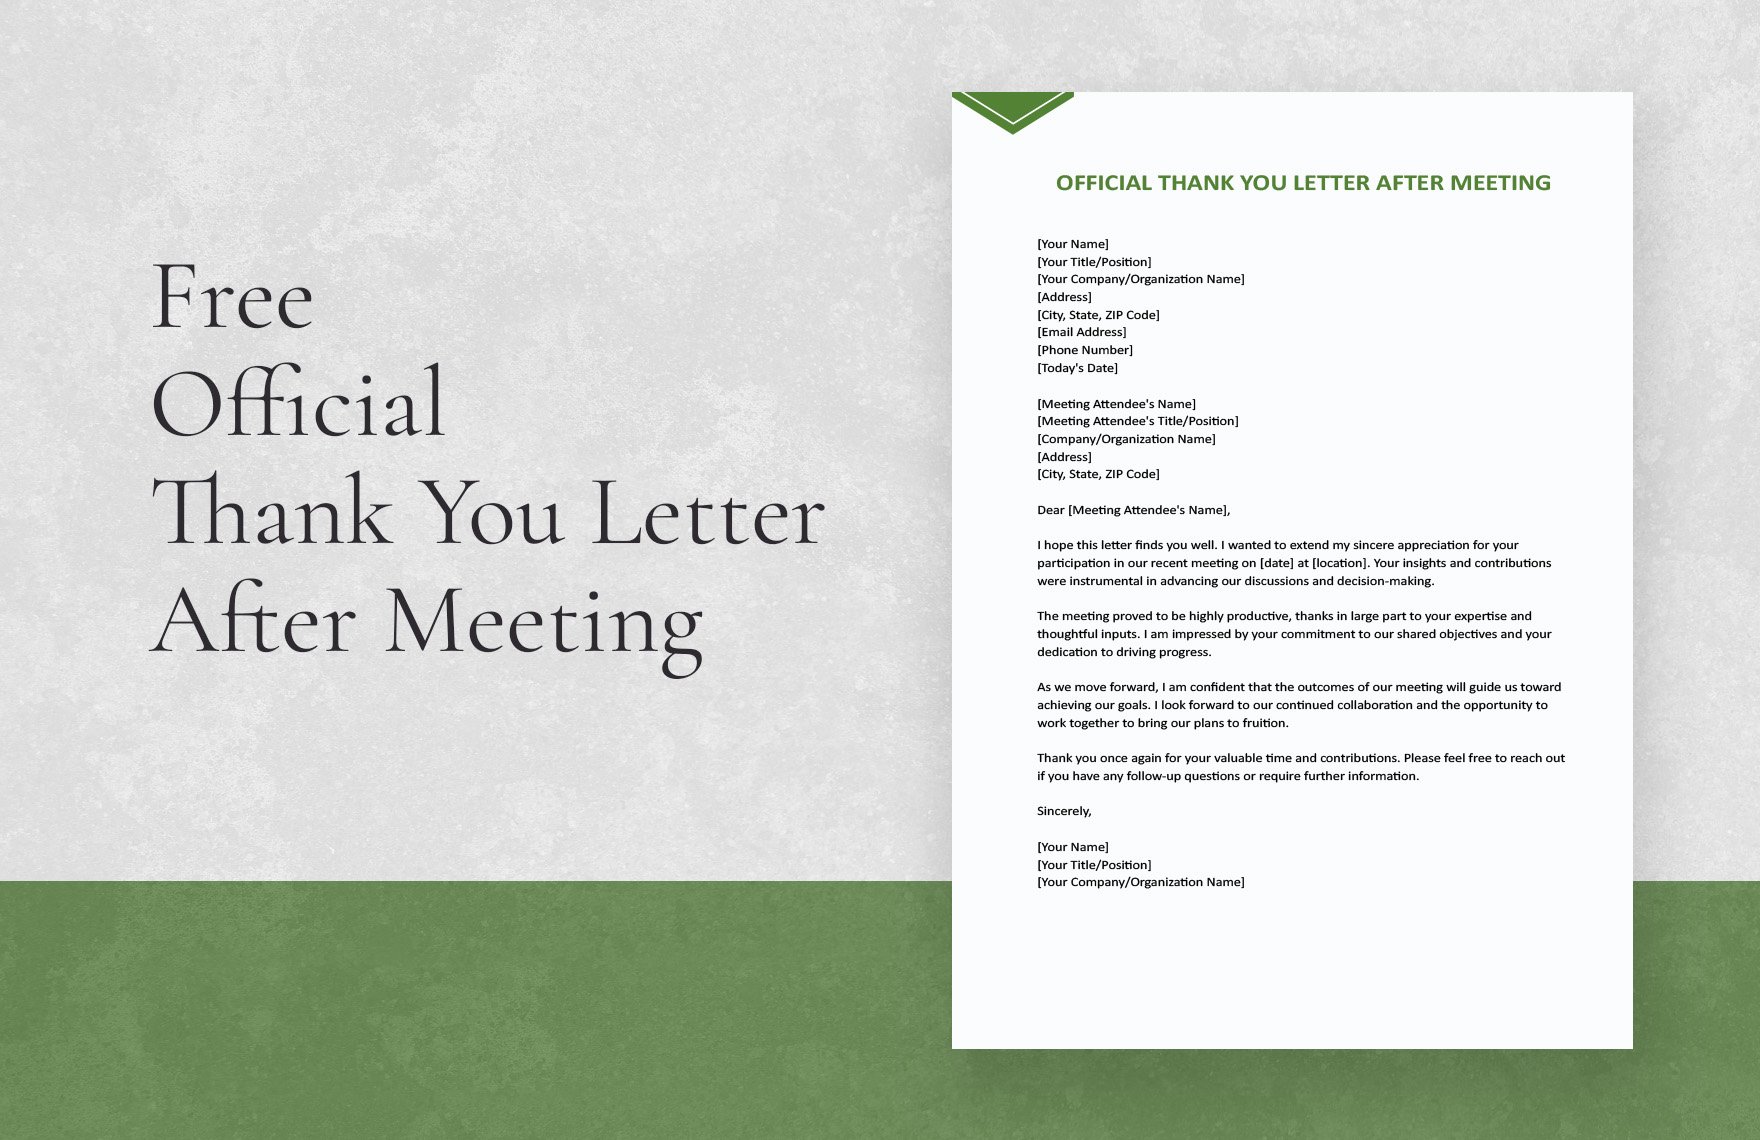 Free Official Thank You Letter After Meeting in Word, Google Docs